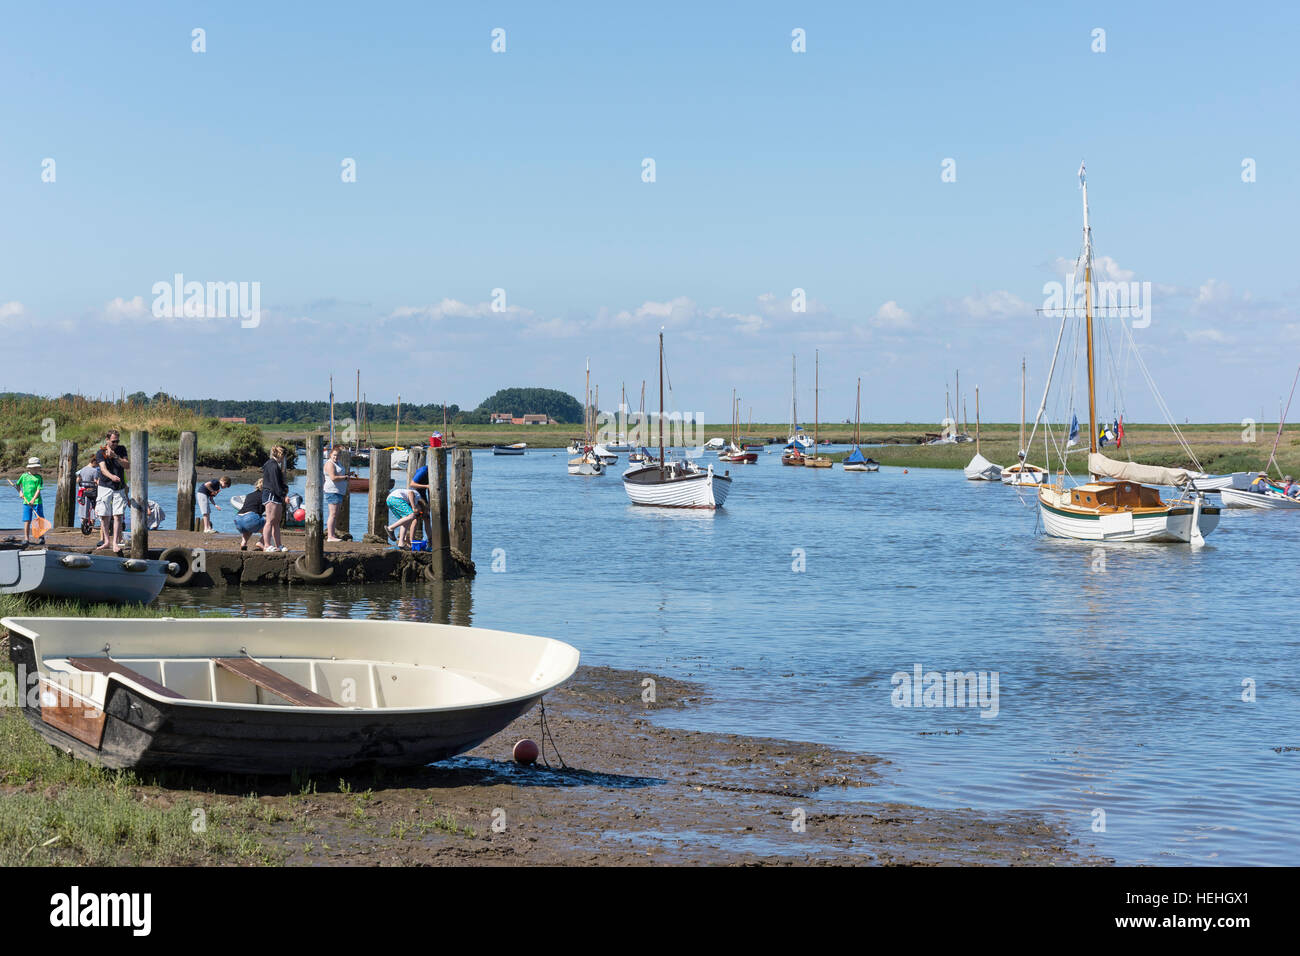 Traditional sailing boats on River Burn from The Quay, Burnham Overy Staithe, Norfolk, England, United Kingdom Stock Photo